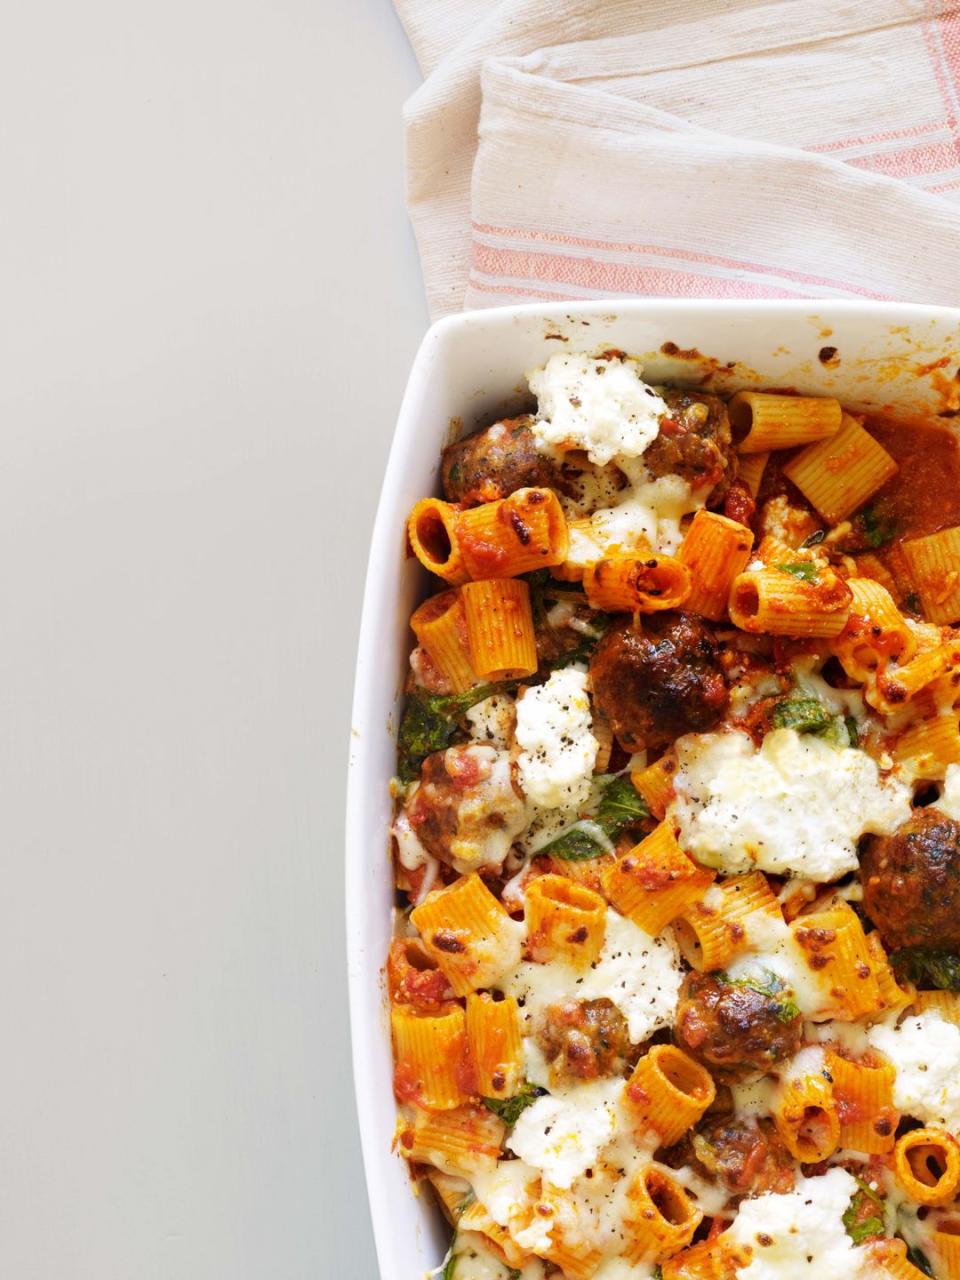 Baked Pasta with Meatballs and Spinach